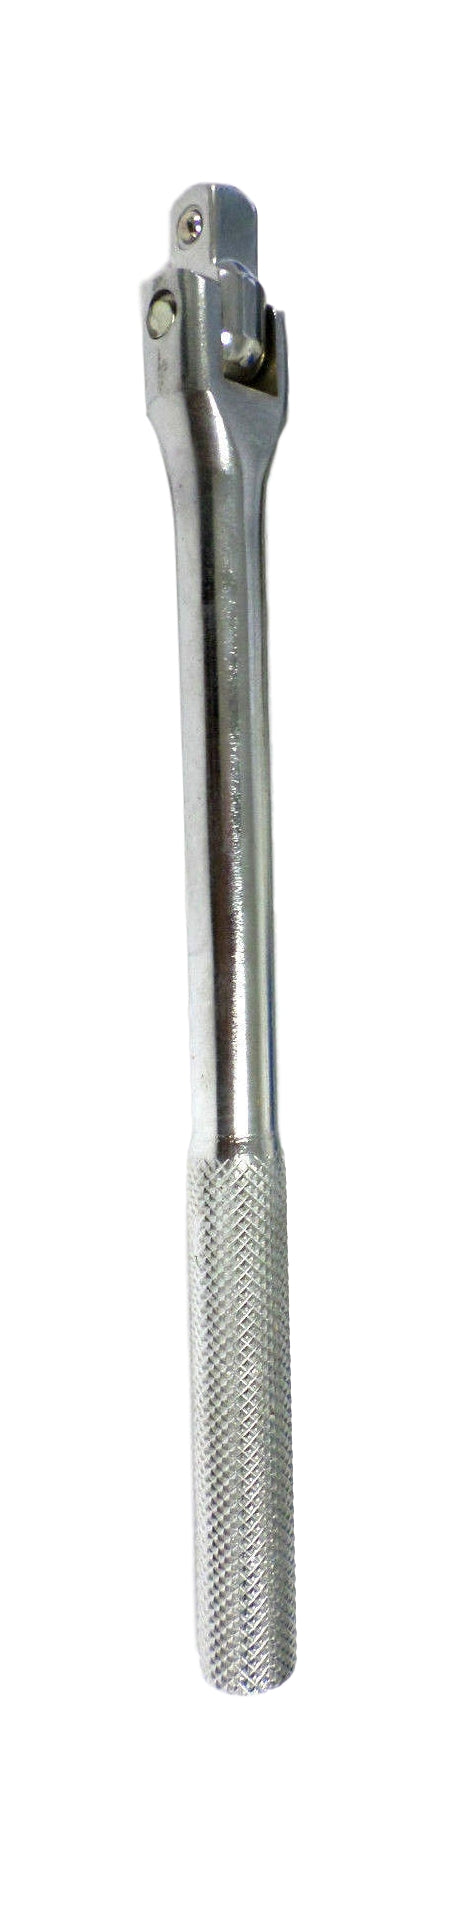 Great Neck FL38 3/8 Drive Socket Flexible Handle 180 Angle Chrome Plated New!